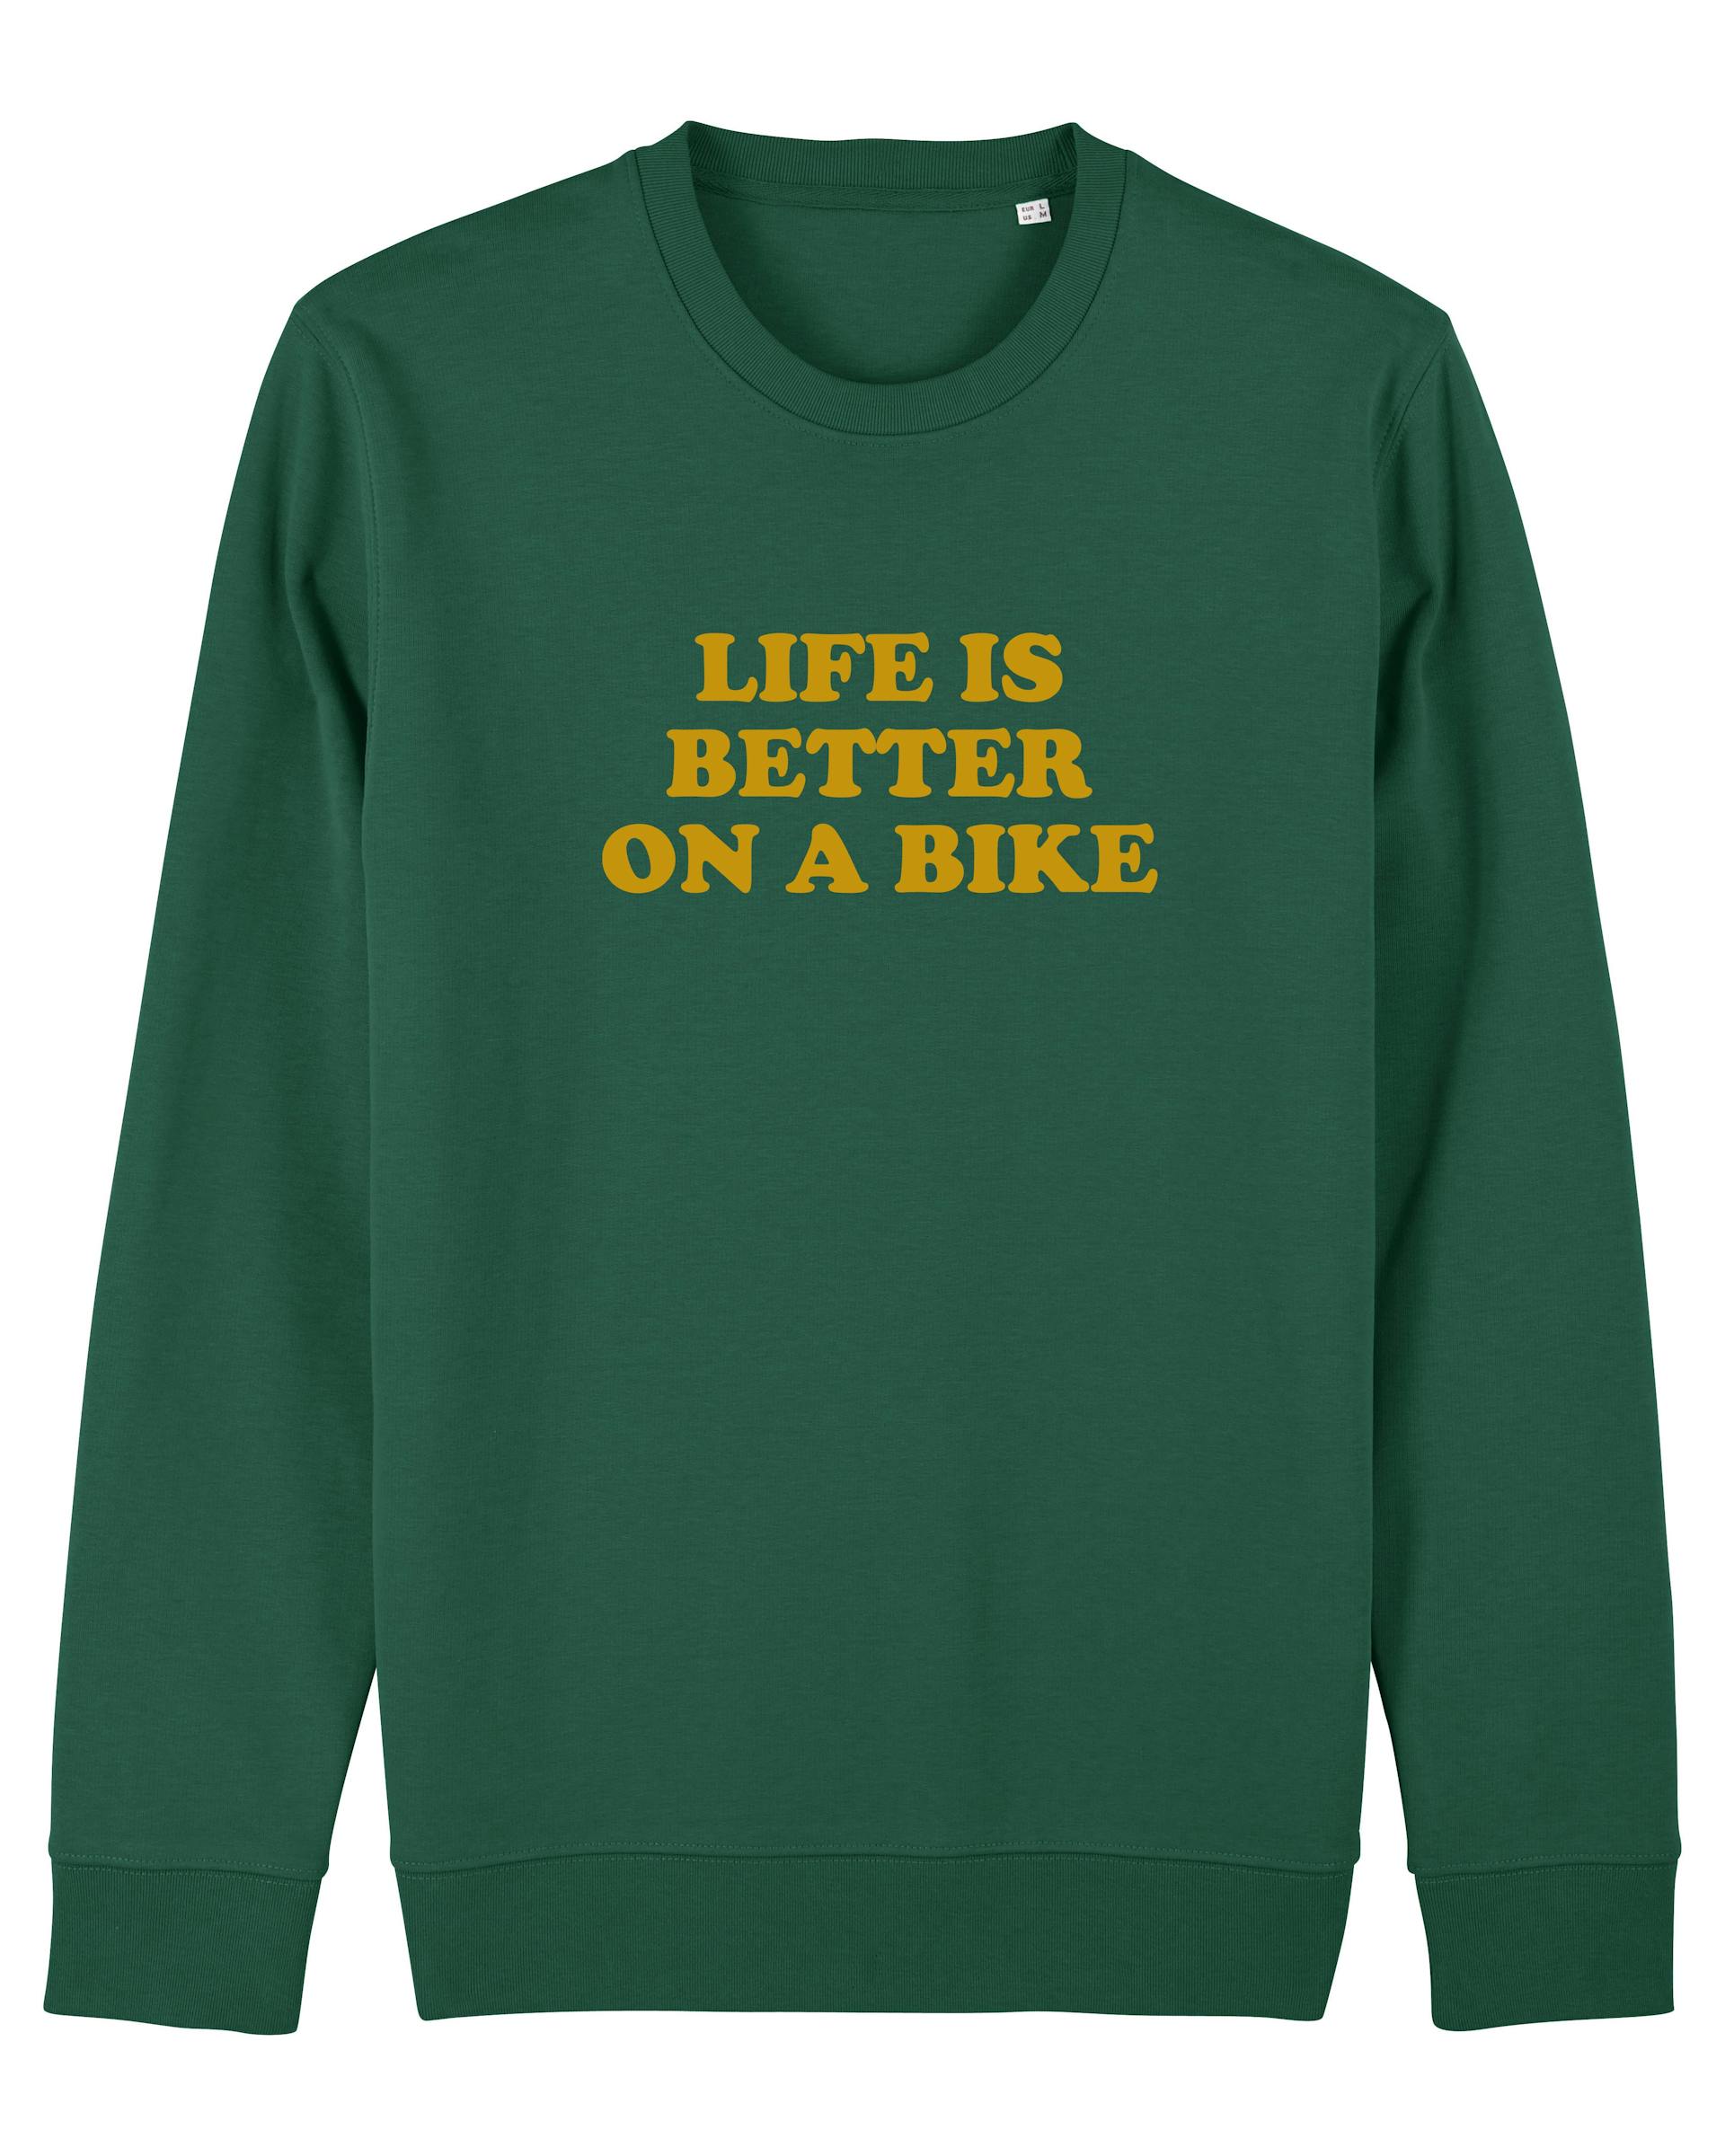 Life is better on a bike Cycling Sweater (green)